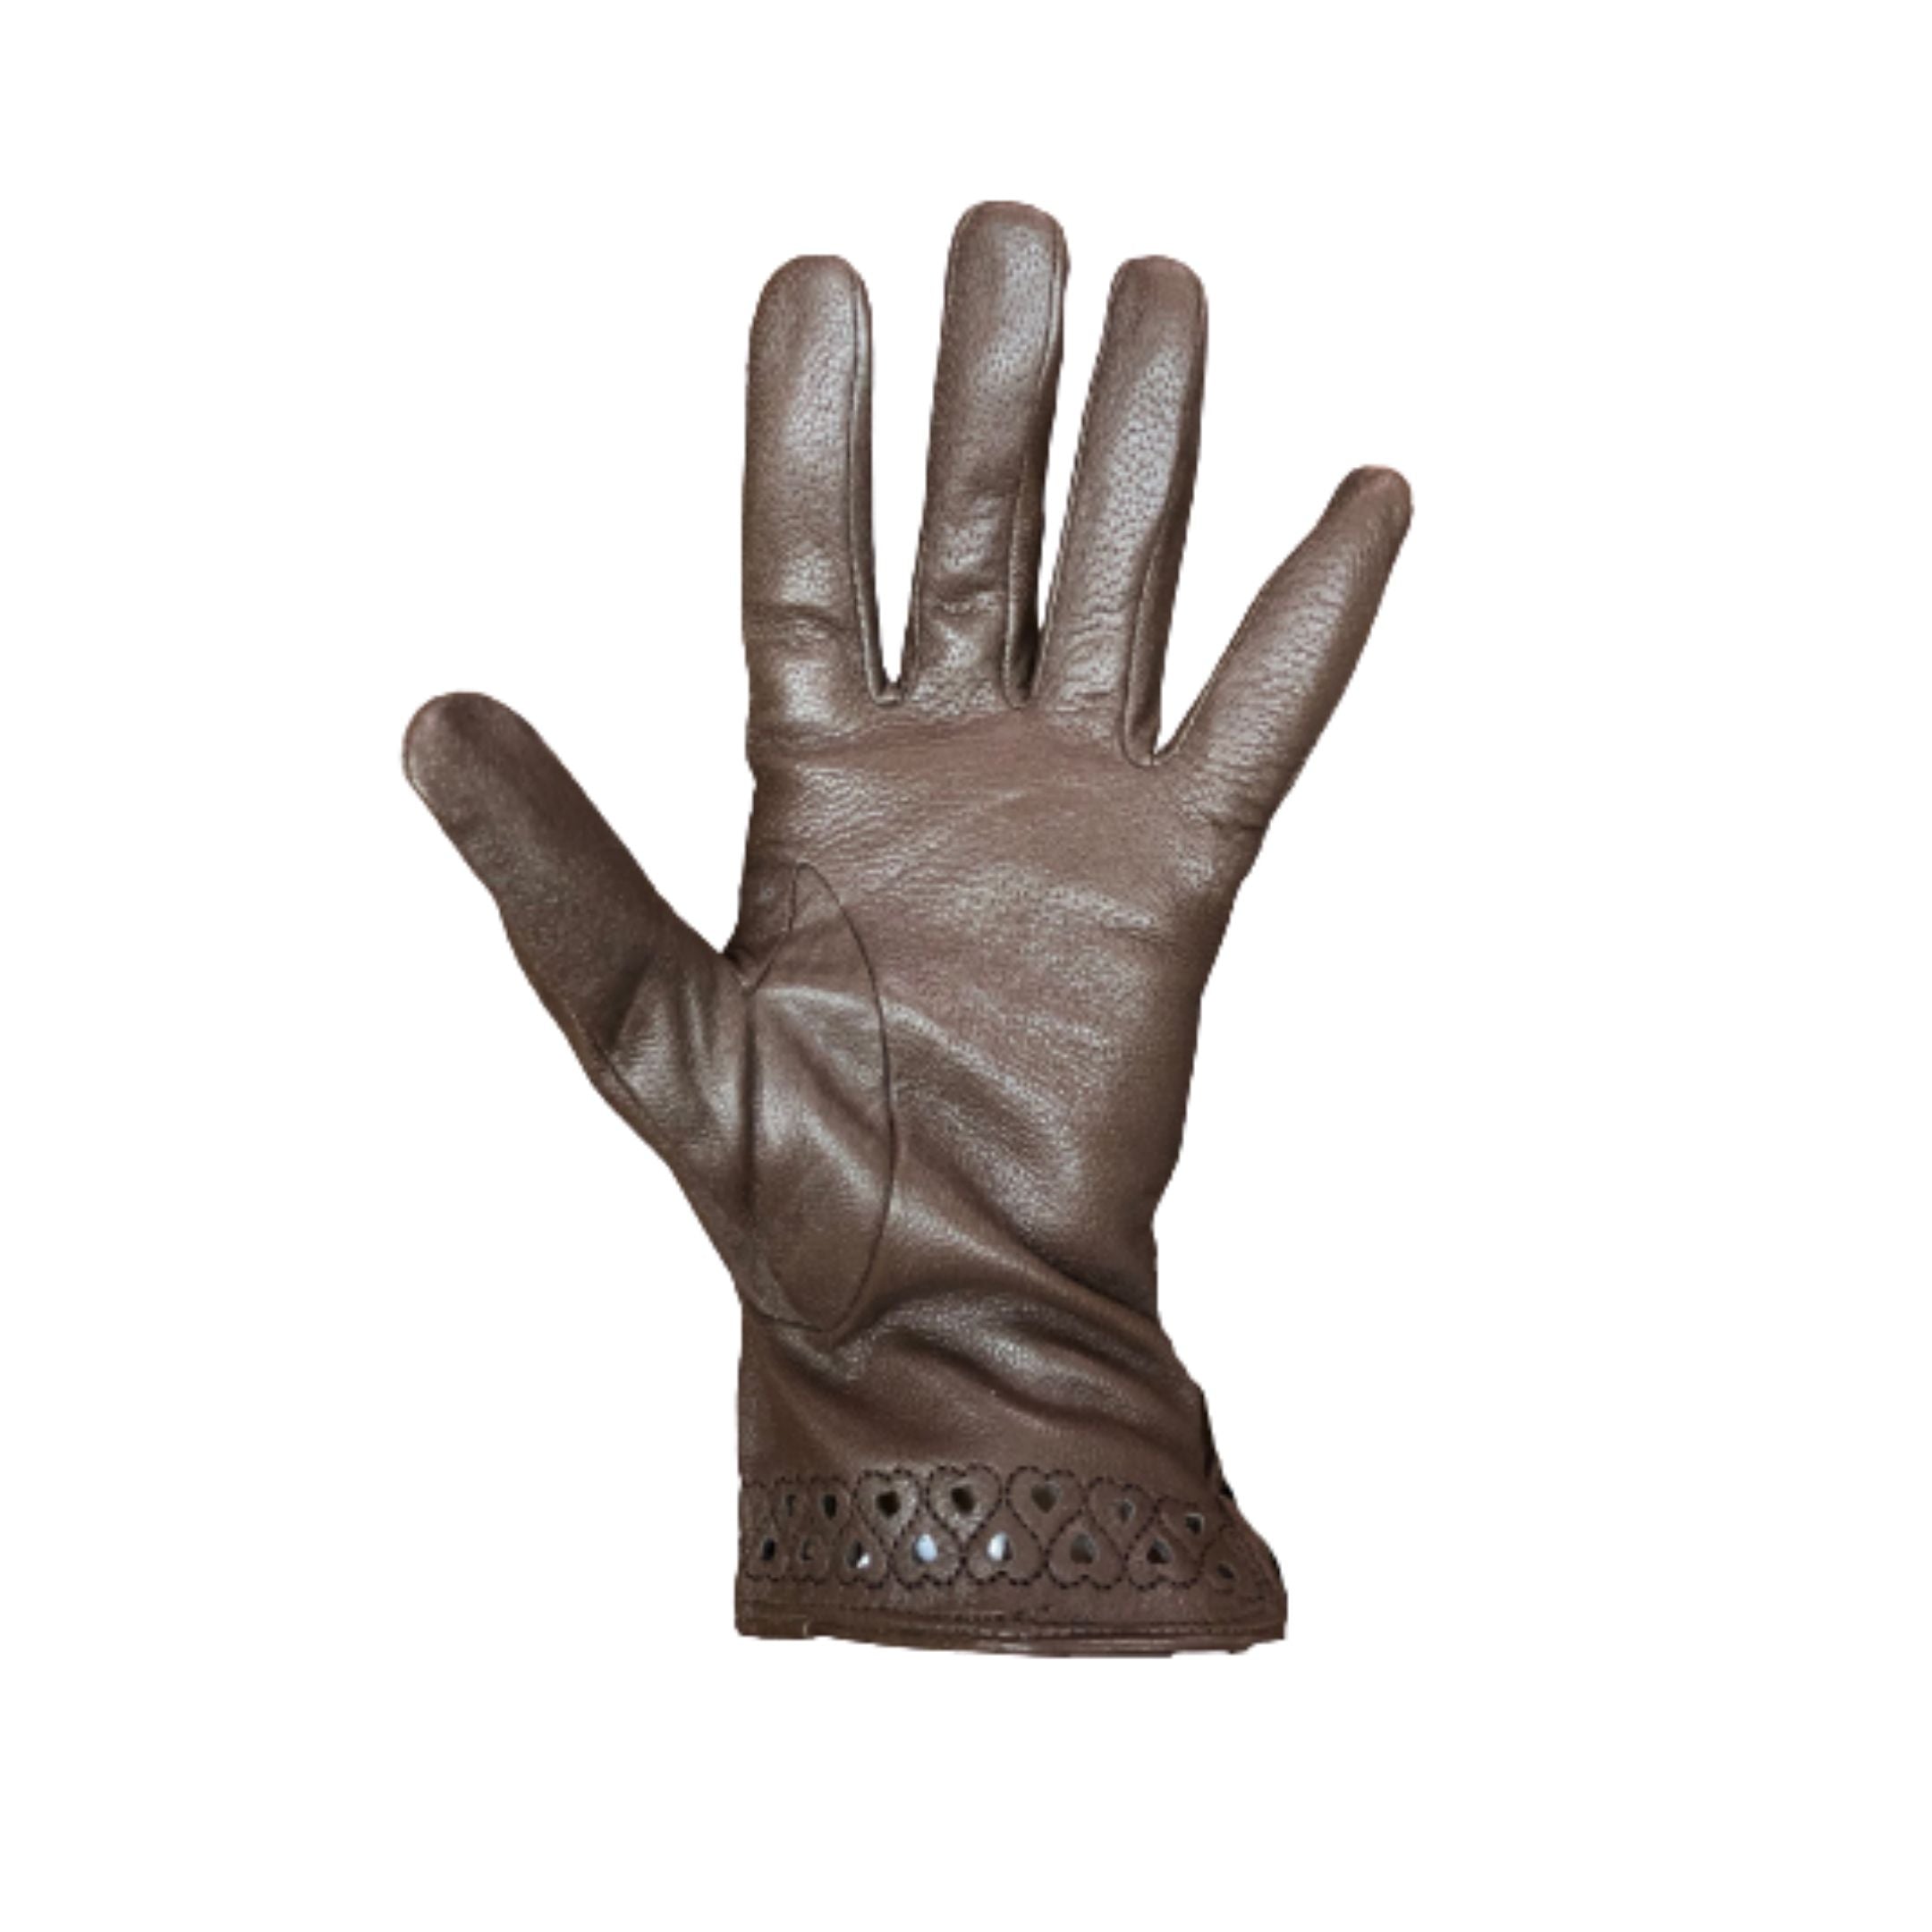 Palm side view of brown leather gloves with heart shaped stitching and cutouts along the cuff.